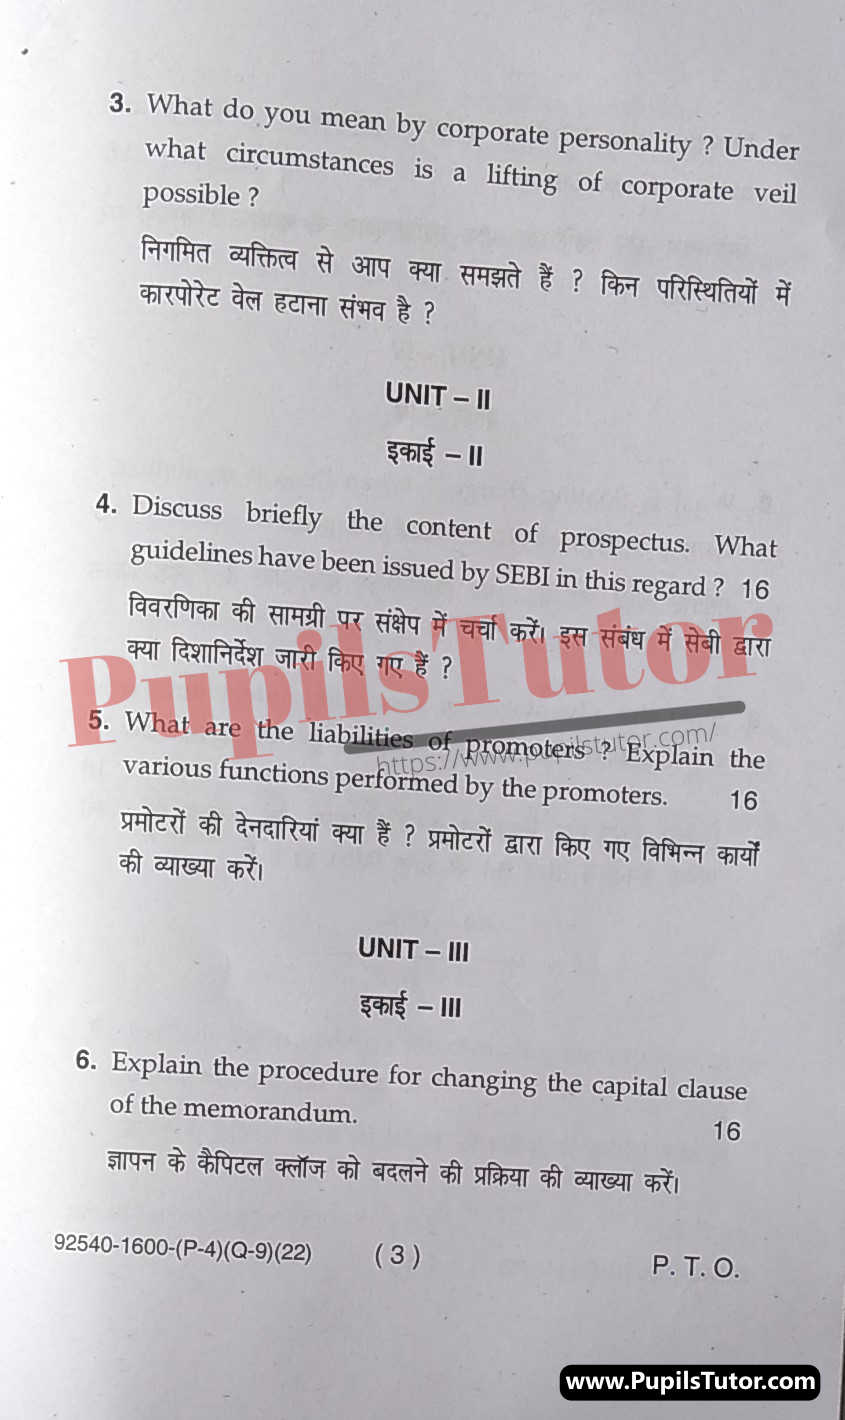 Free Download PDF Of M.D. University B.Com. (Hons.) Third Semester Latest Question Paper For Company Law Subject (Page 3) - https://www.pupilstutor.com